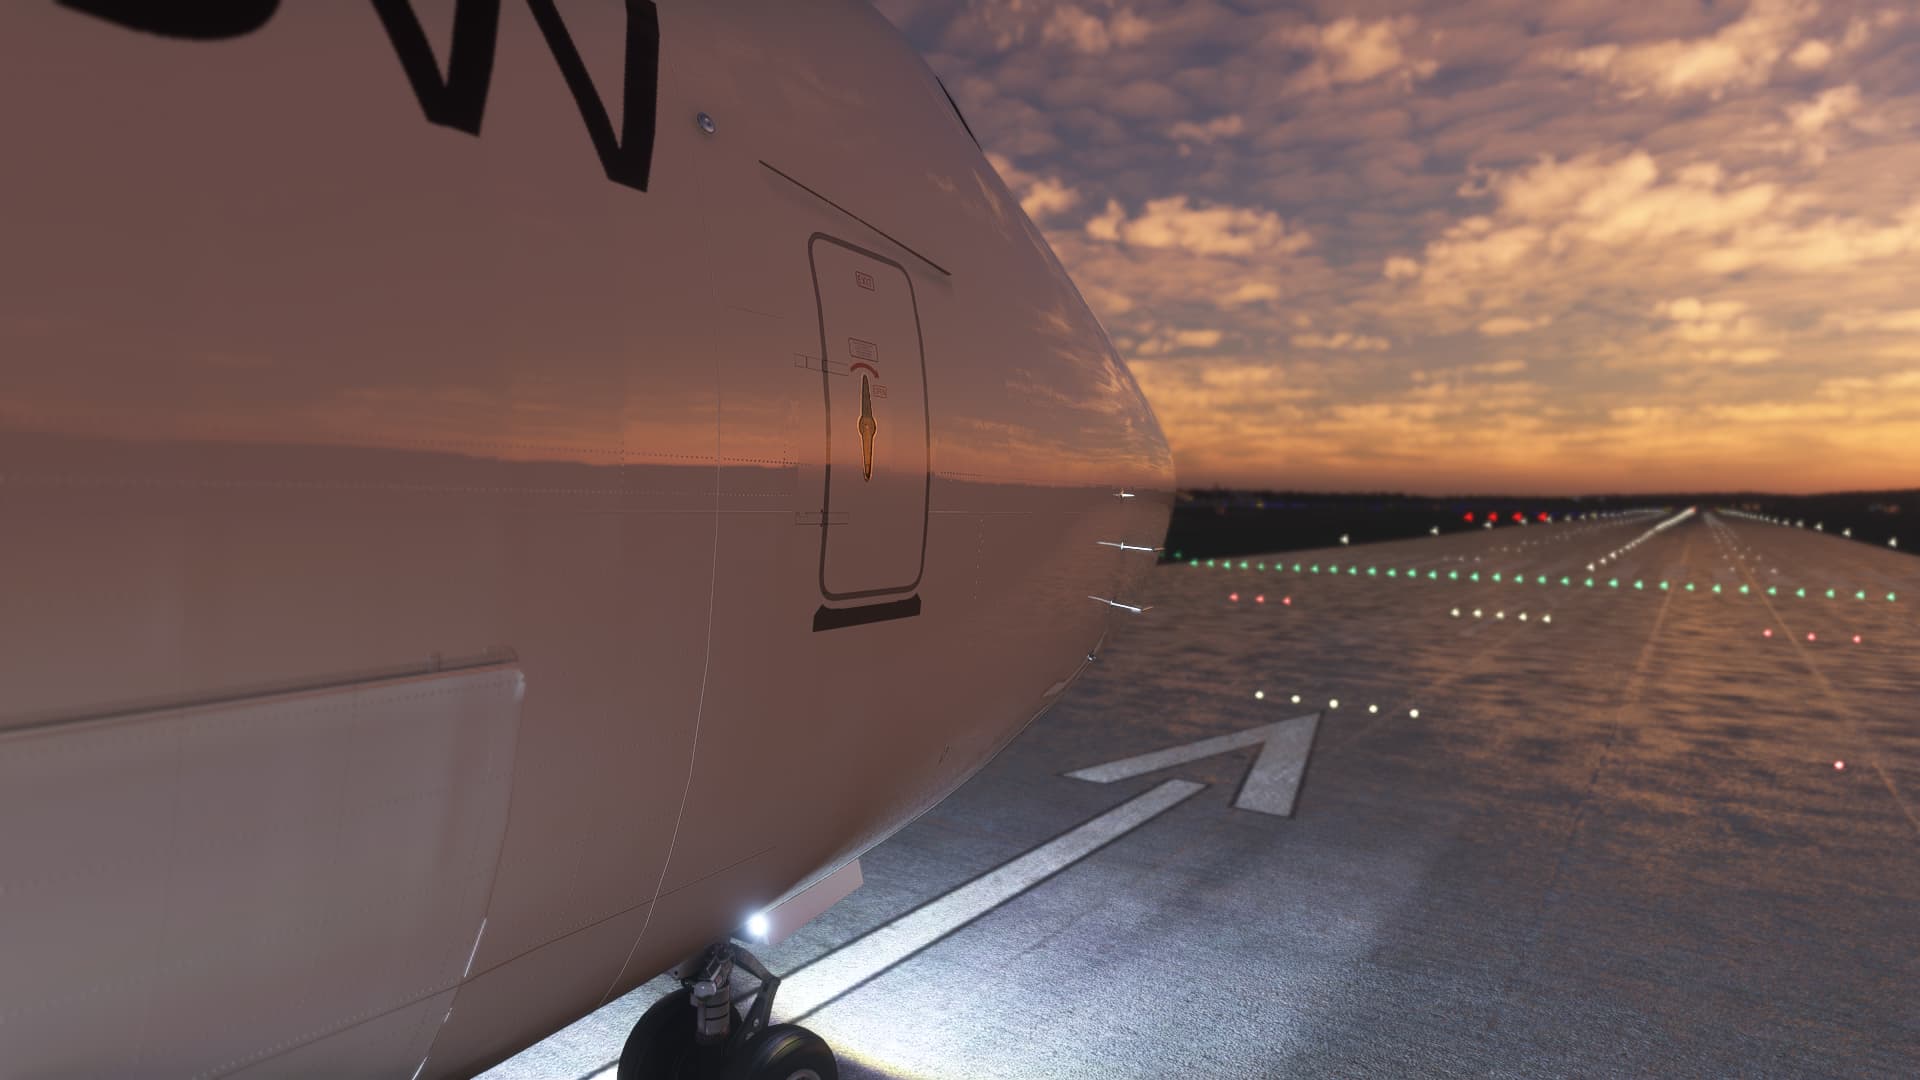 Forward facing view of a jet airliner's nose section. The plane is on a runway about to takeoff.